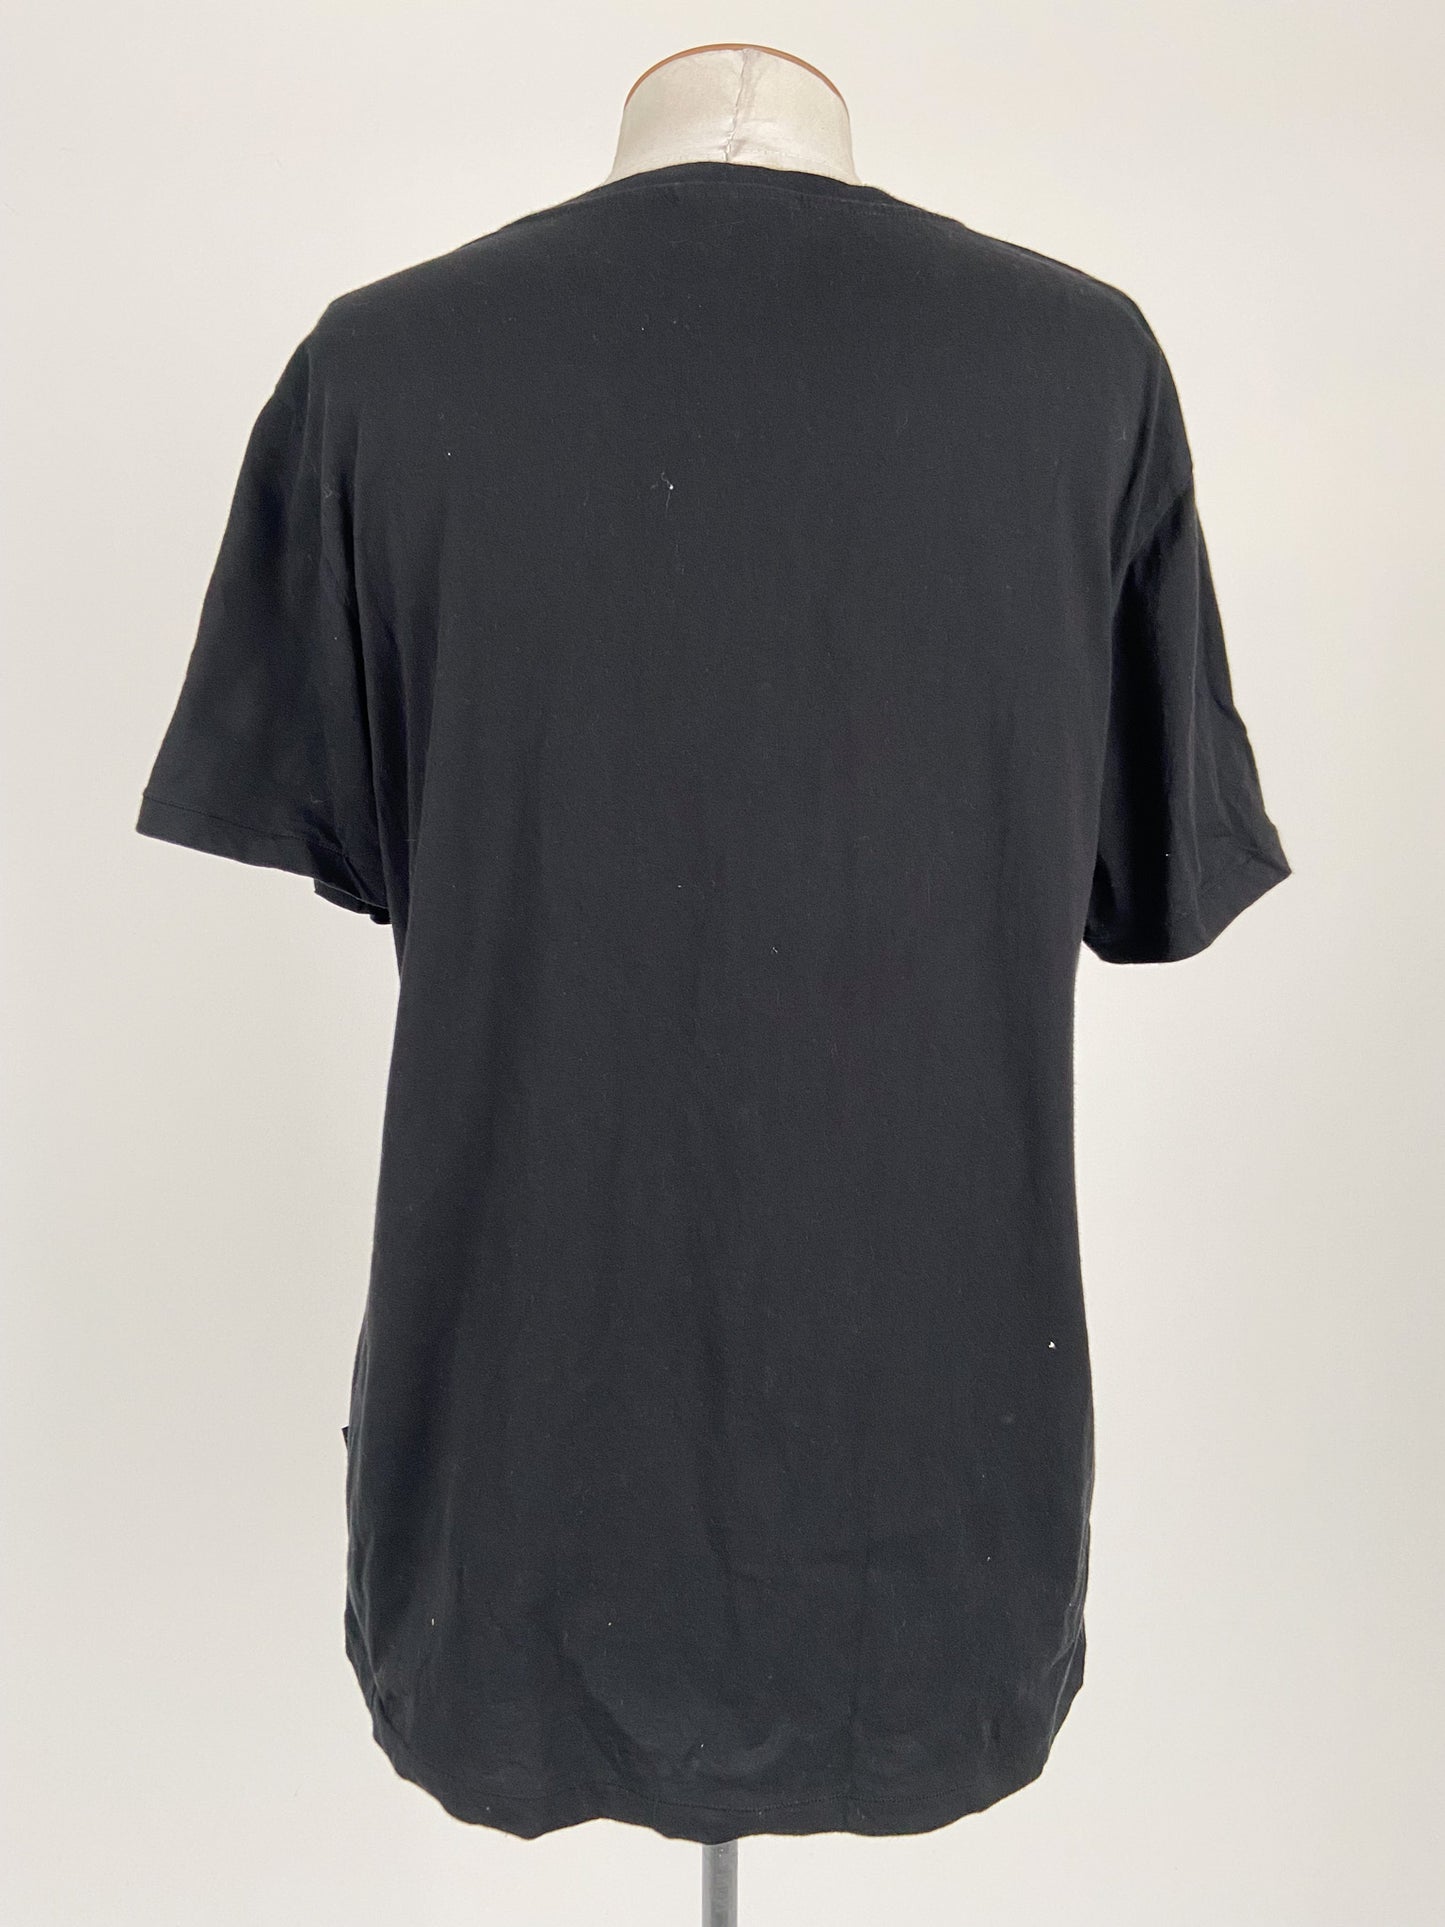 Federation | Black Casual Top | Size M